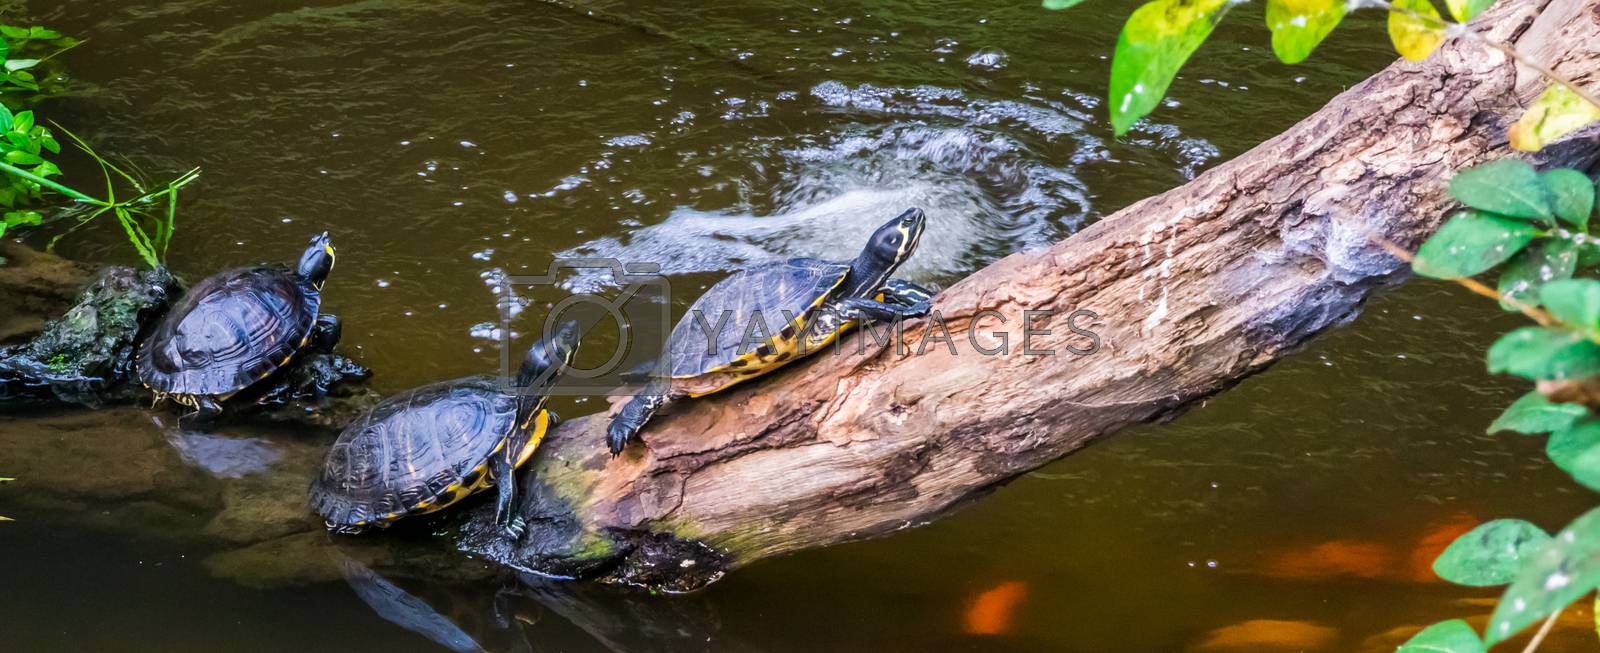 group of turtles sitting at the water side, popular tropical pets from America, Semi aquatic reptiles